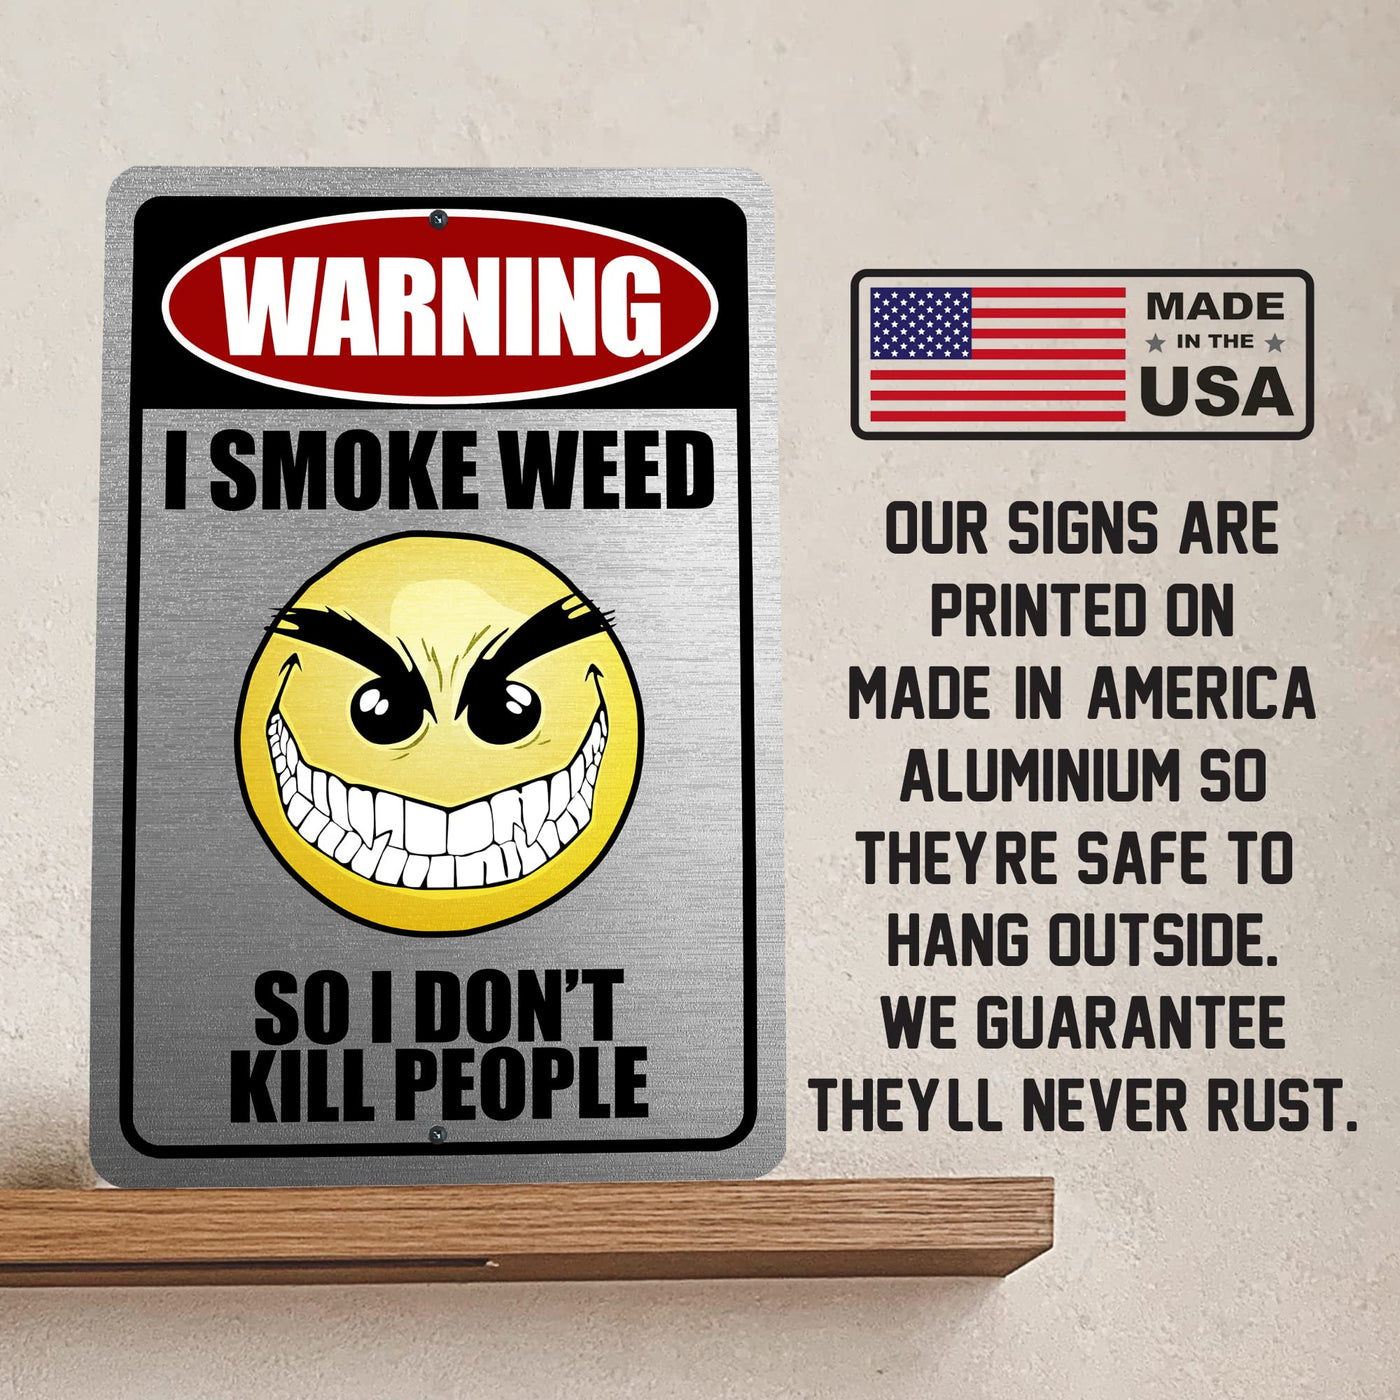 Warning - I Smoke Weed Metal Signs Vintage Wall Art -8 x 12" Funny Retro Emoji Sign for Bar, Man Cave, Garage, Pub, Shop- Rustic Tin Outdoors Sign for Home-Kitchen-Patio-Beach House-Deck Decor!